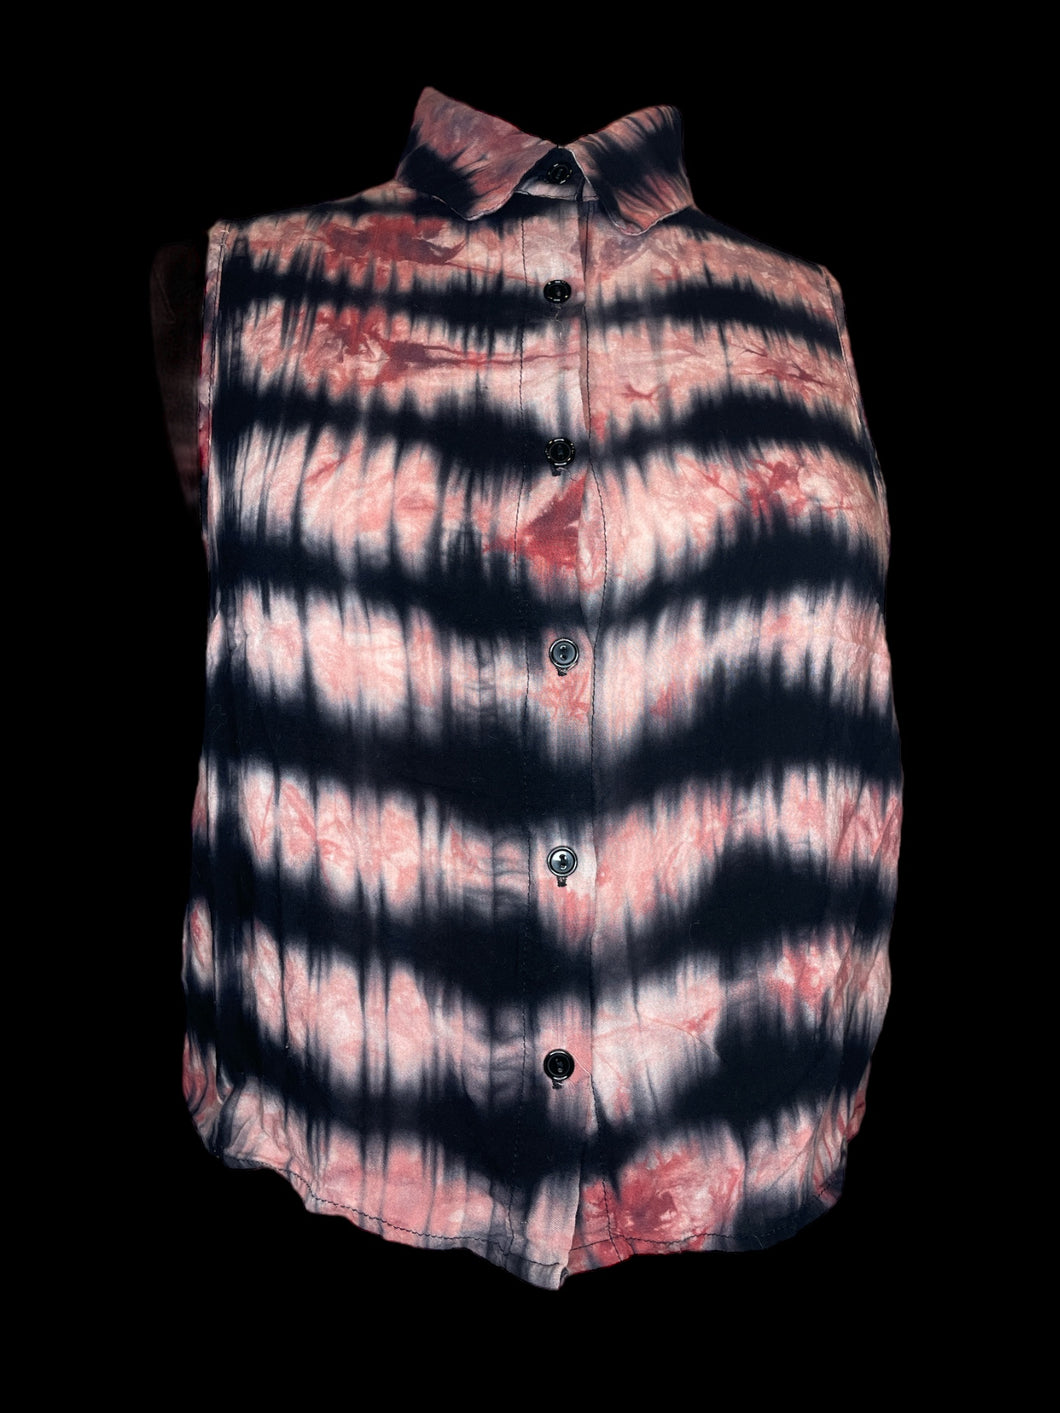 M Black & pink tie dye sleevless collared button down top